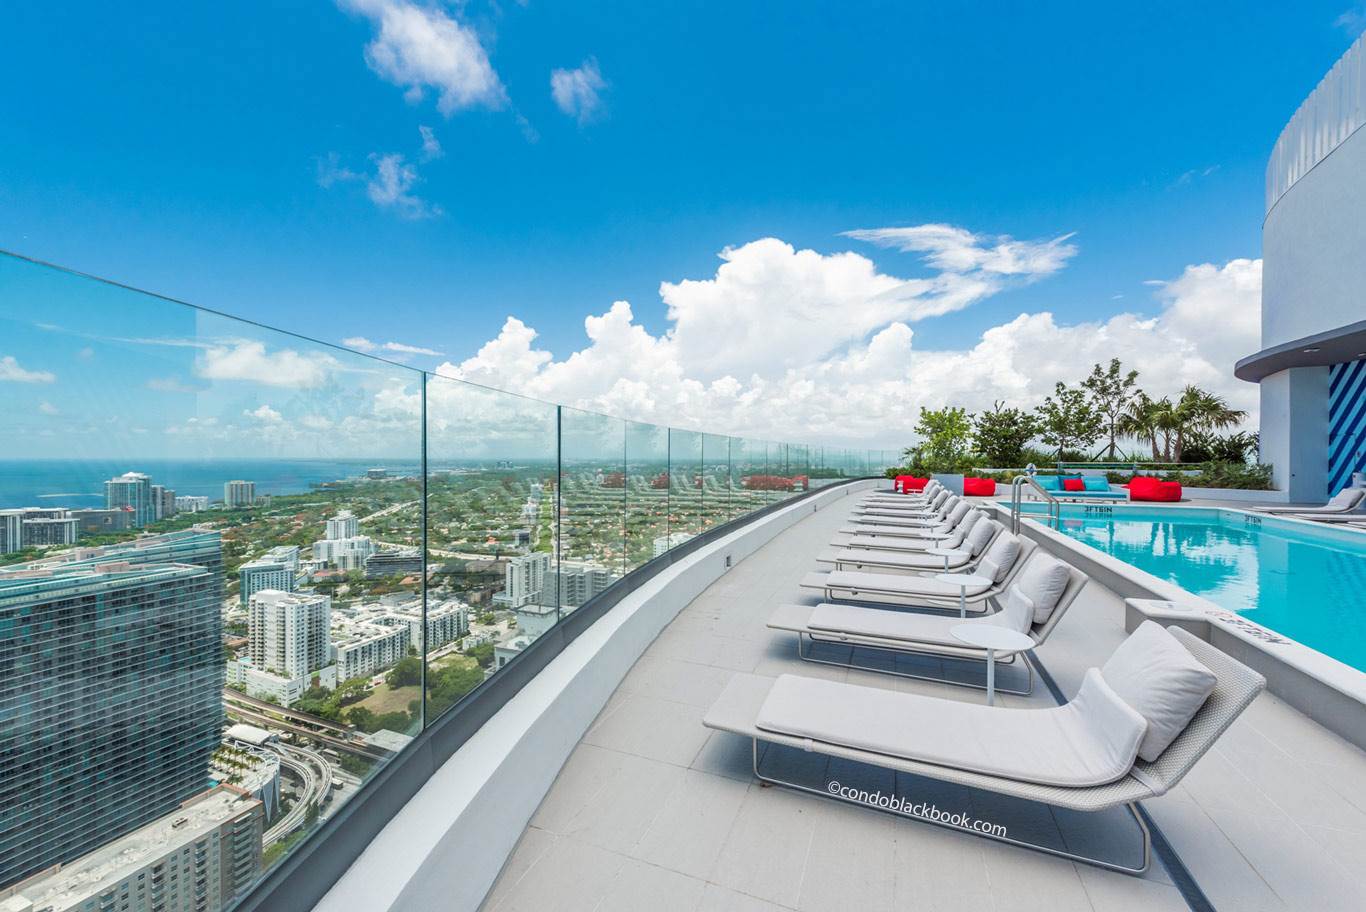 Incredible Miami Skyline View from the Rooftop pool deck at Brickell Heights